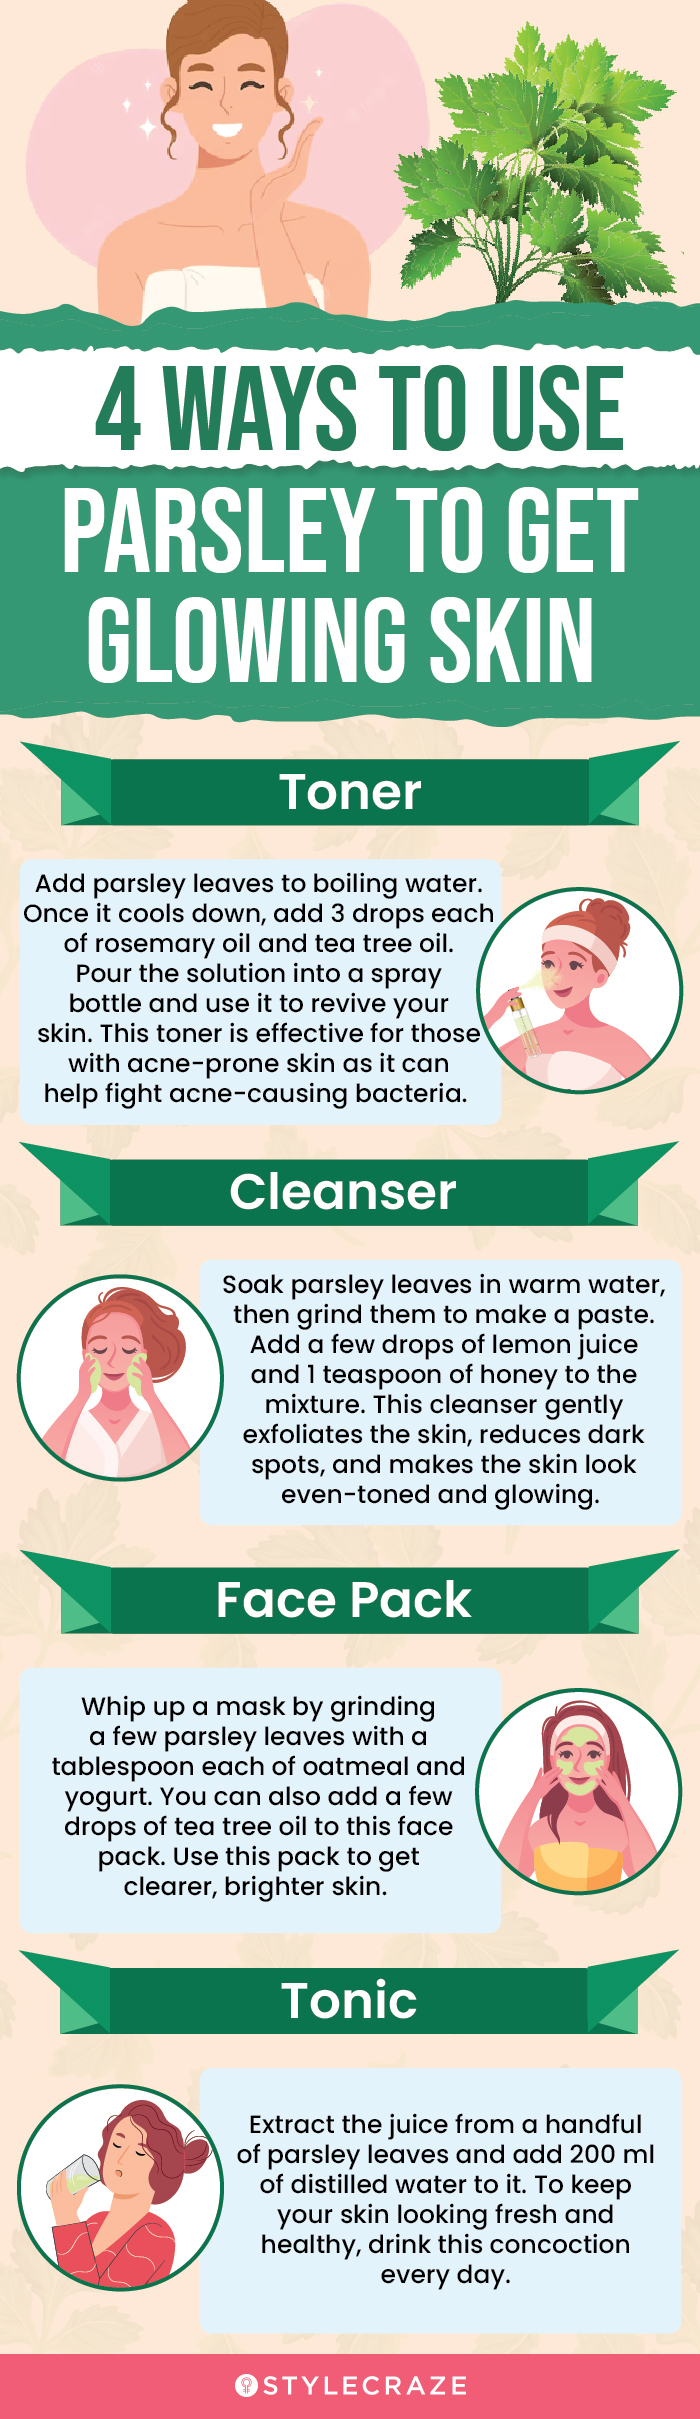 4 ways to use parsley to get glowing skin (infographic)